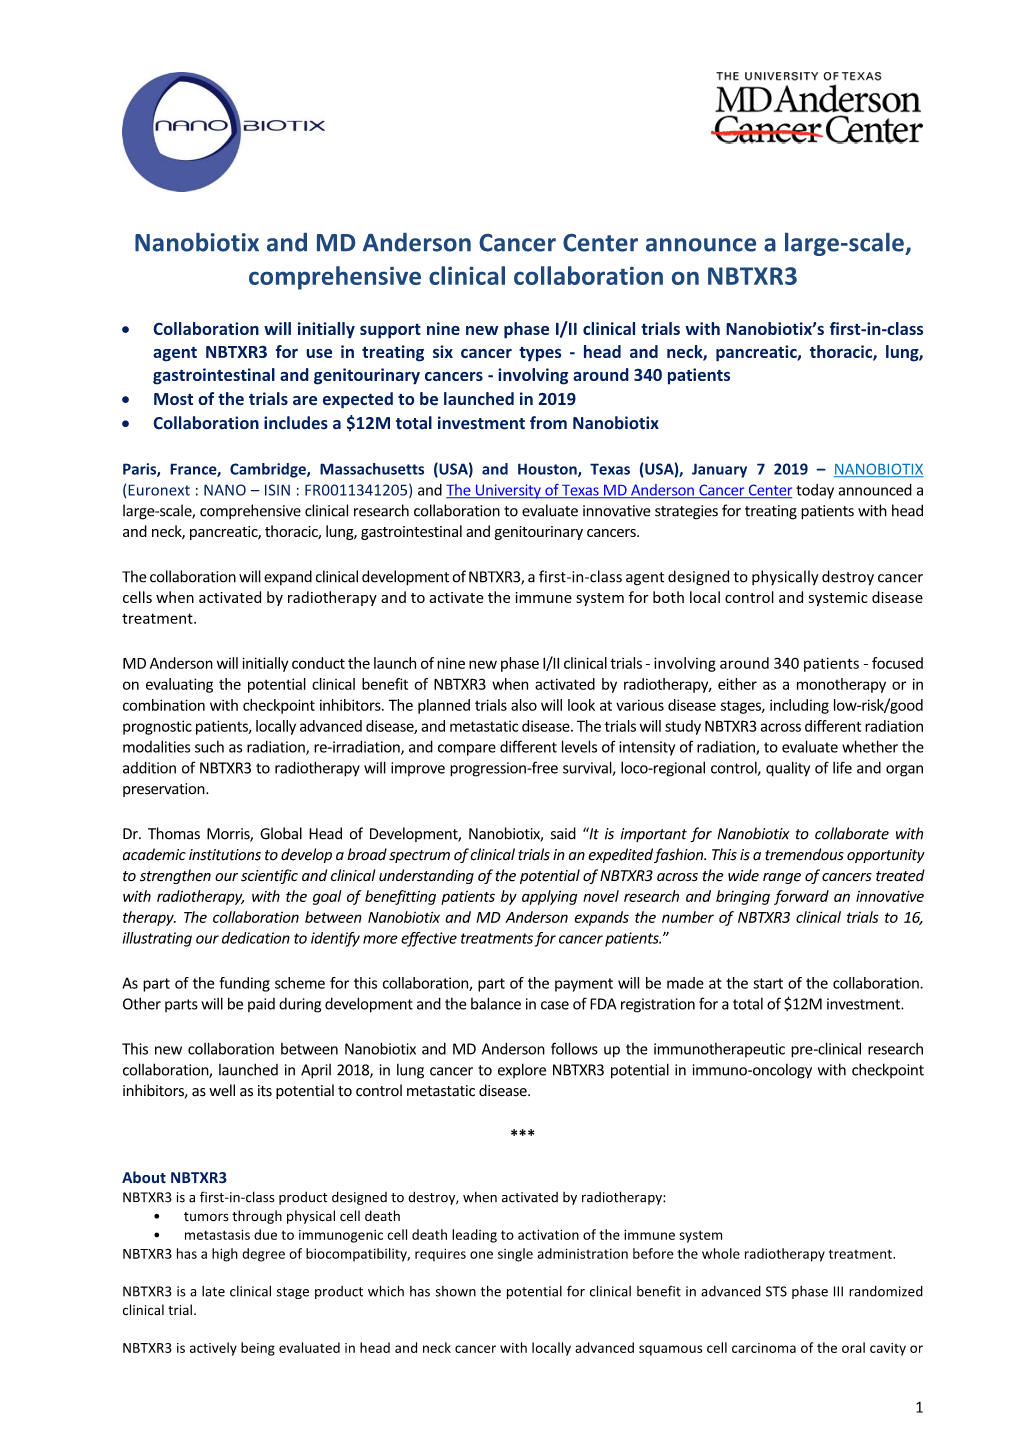 Nanobiotix and MD Anderson Cancer Center Announce a Large-Scale, Comprehensive Clinical Collaboration on NBTXR3